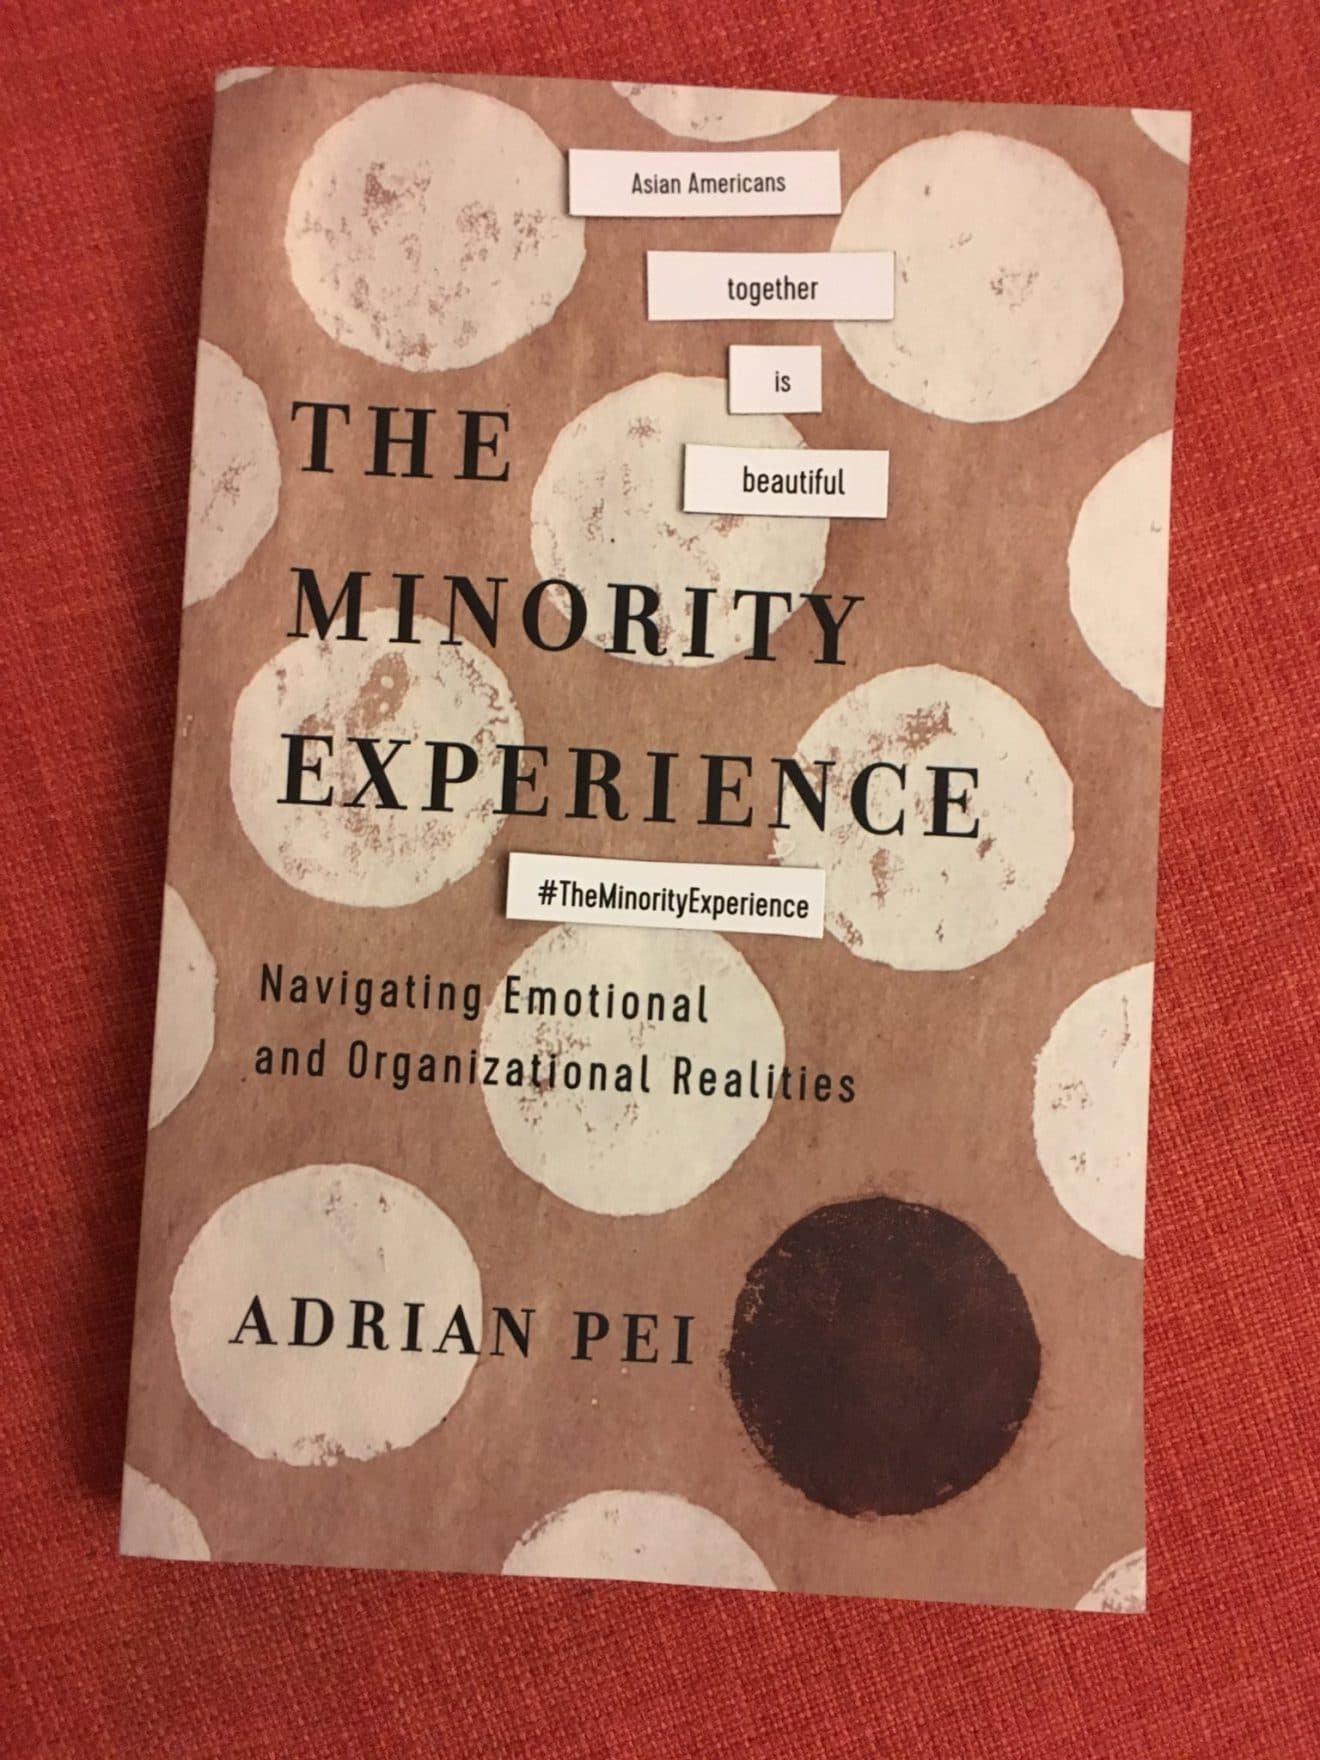 Improve organizational productivity by knowing the pains of the minority experience